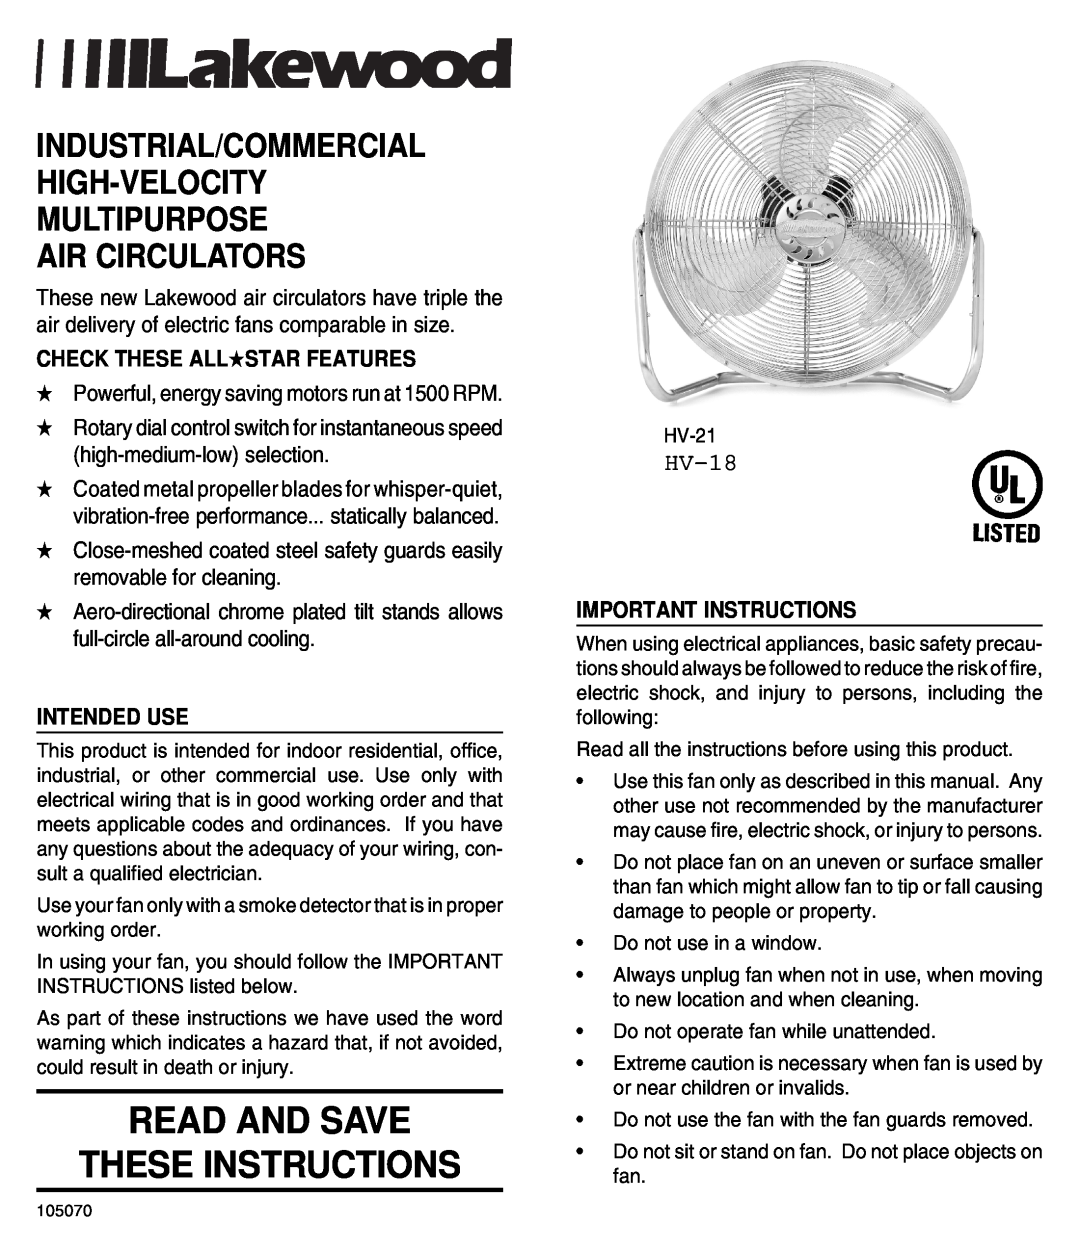 Lakewood Engineering HV-21 manual Read And Save These Instructions, Air Circulators, Check These Allstar Features, HV-18 